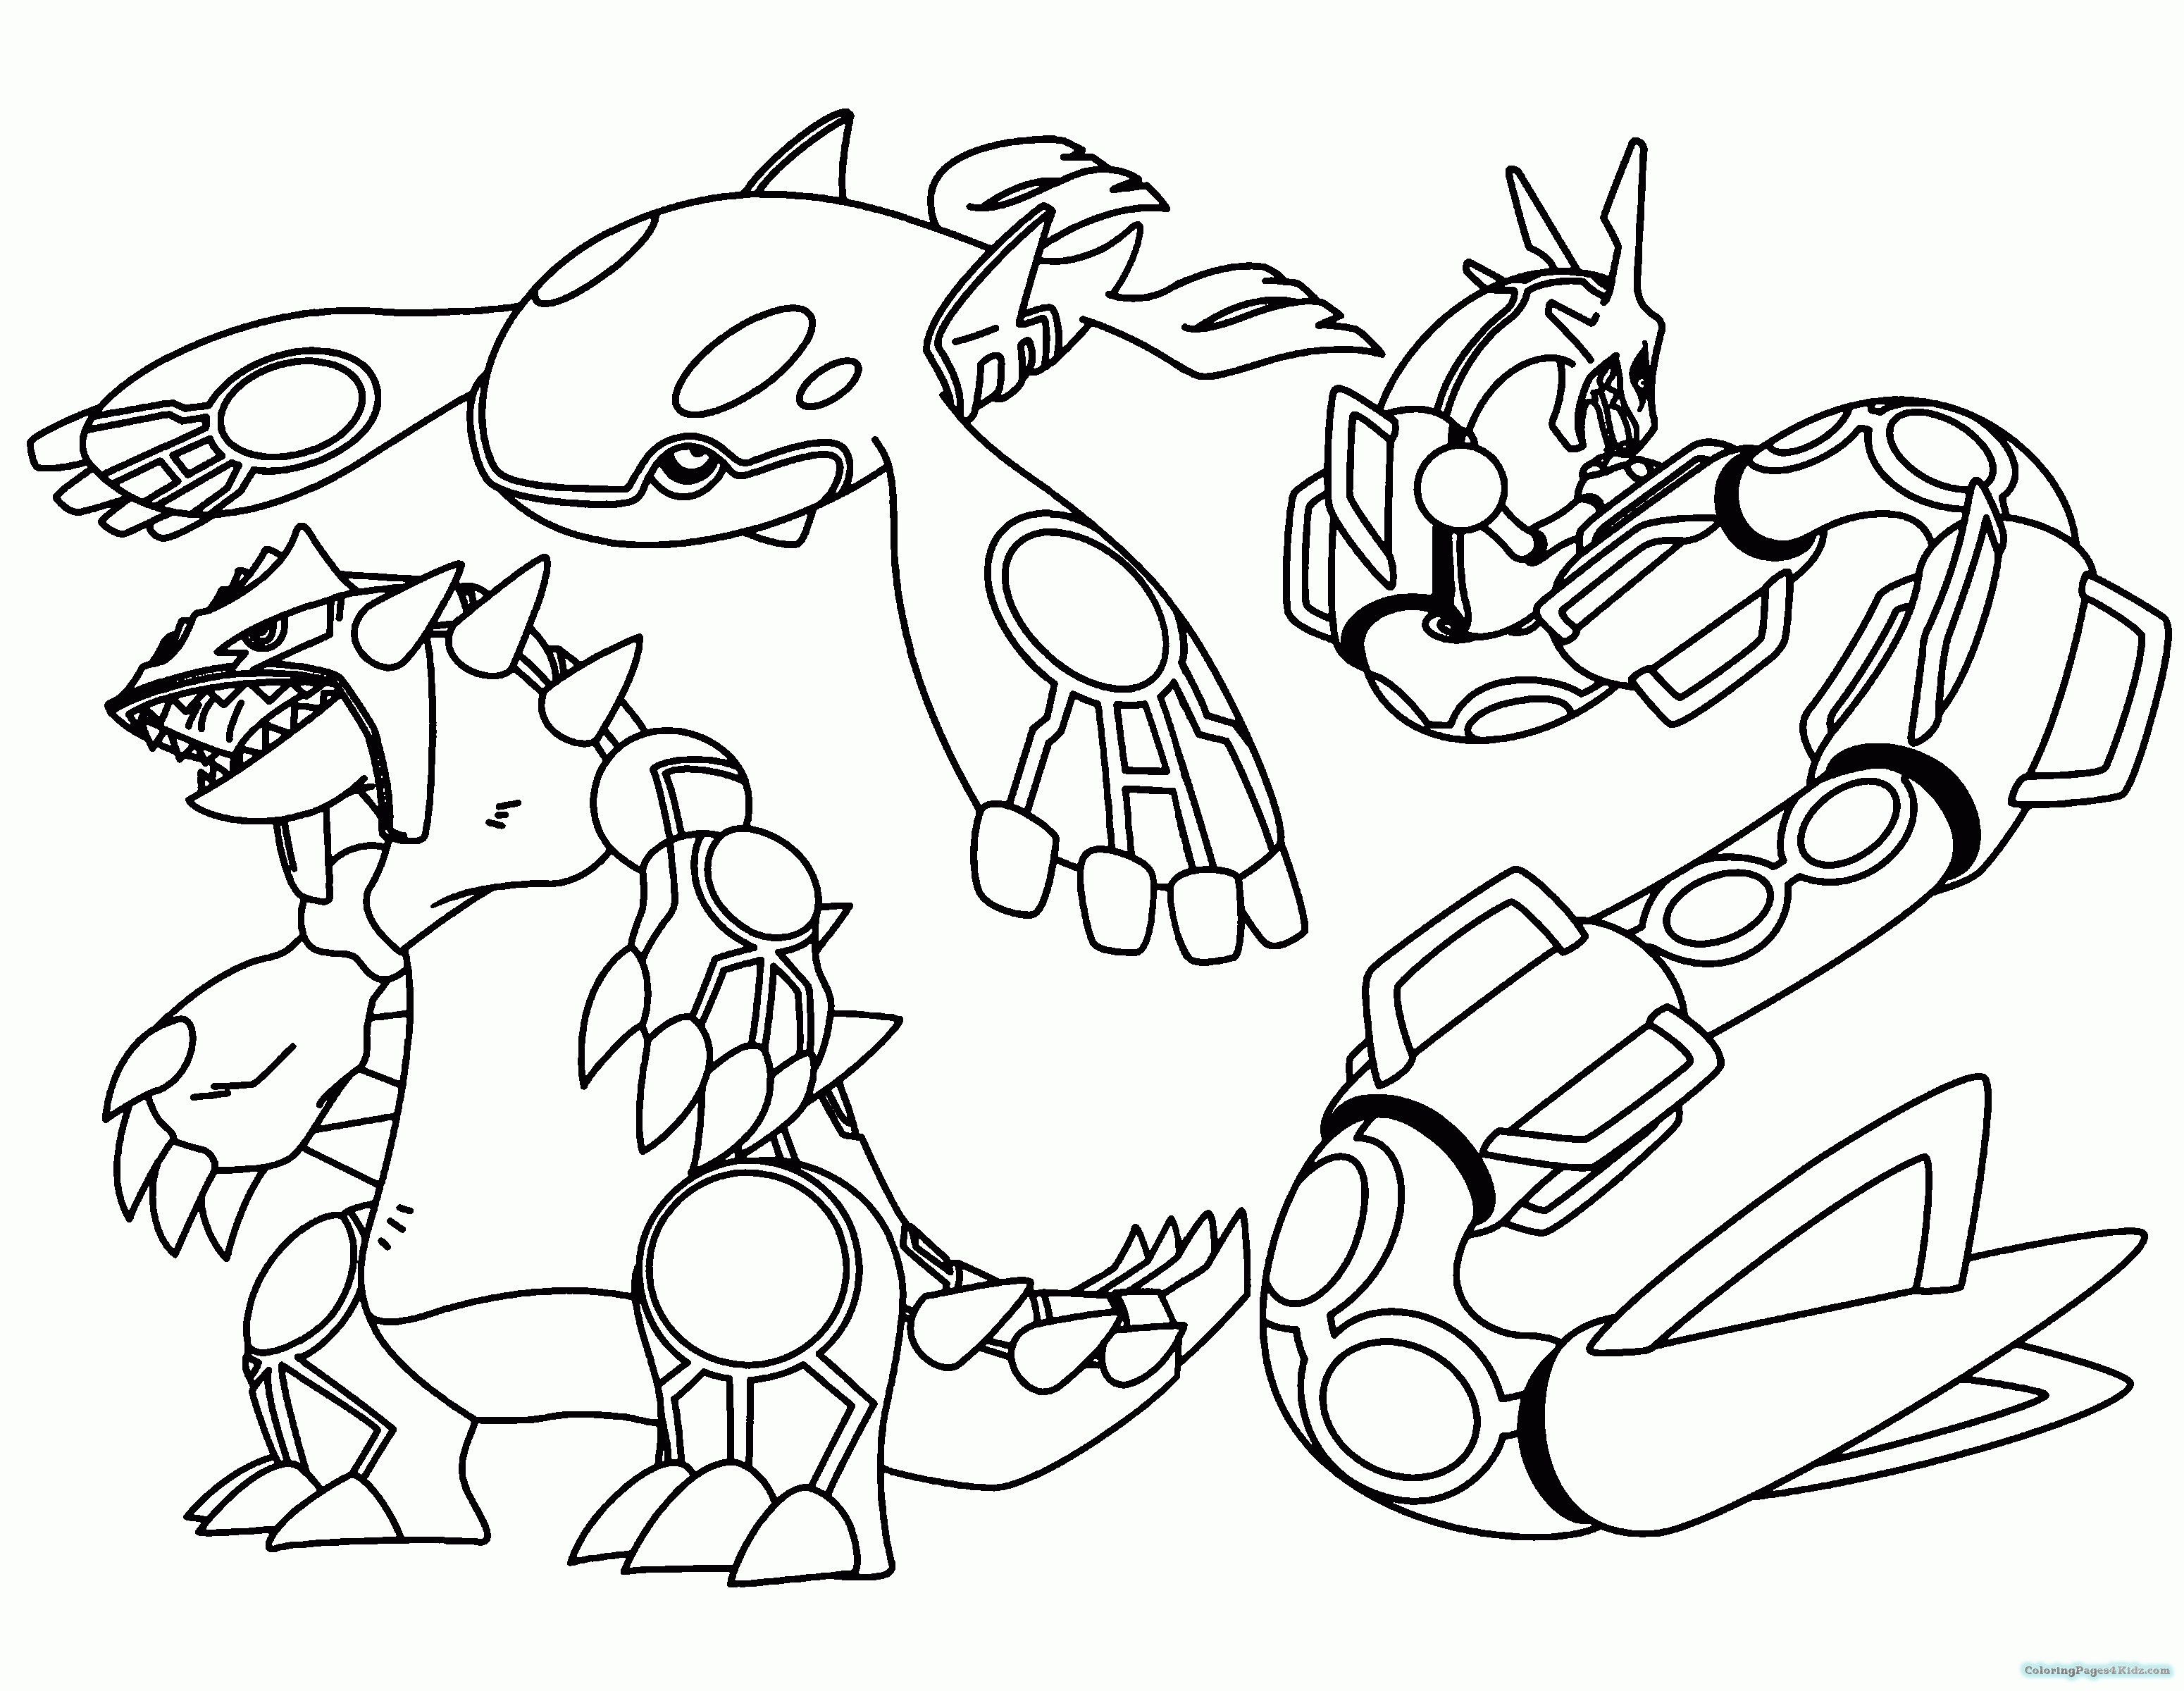 Free Printable Pokemon Coloring Pages Free Printable Pokemon - Free Printable Pokemon Coloring Pages